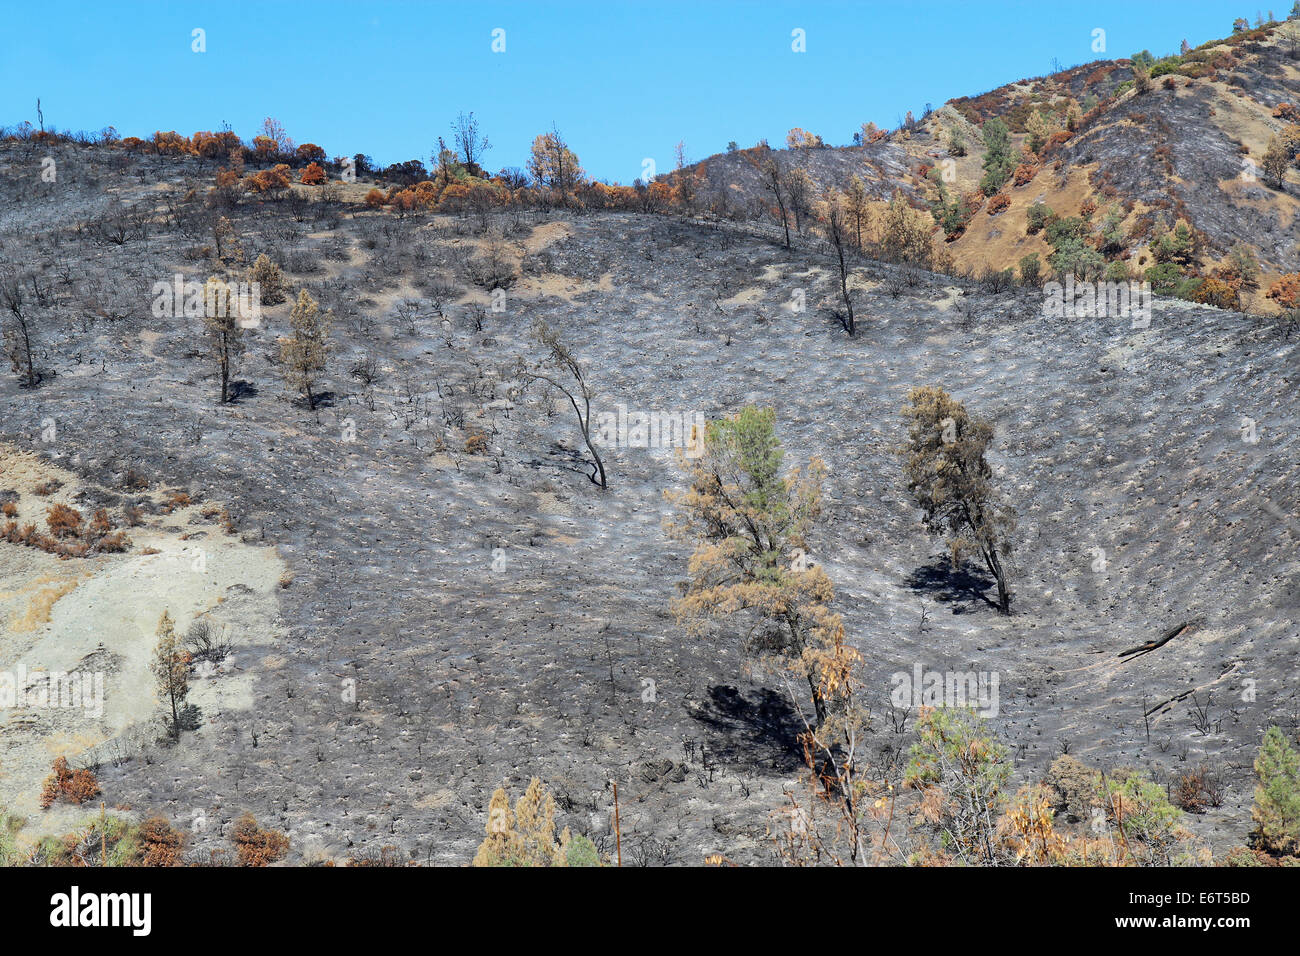 Charred foothills east of Clearlake Oaks, California Stock Photo